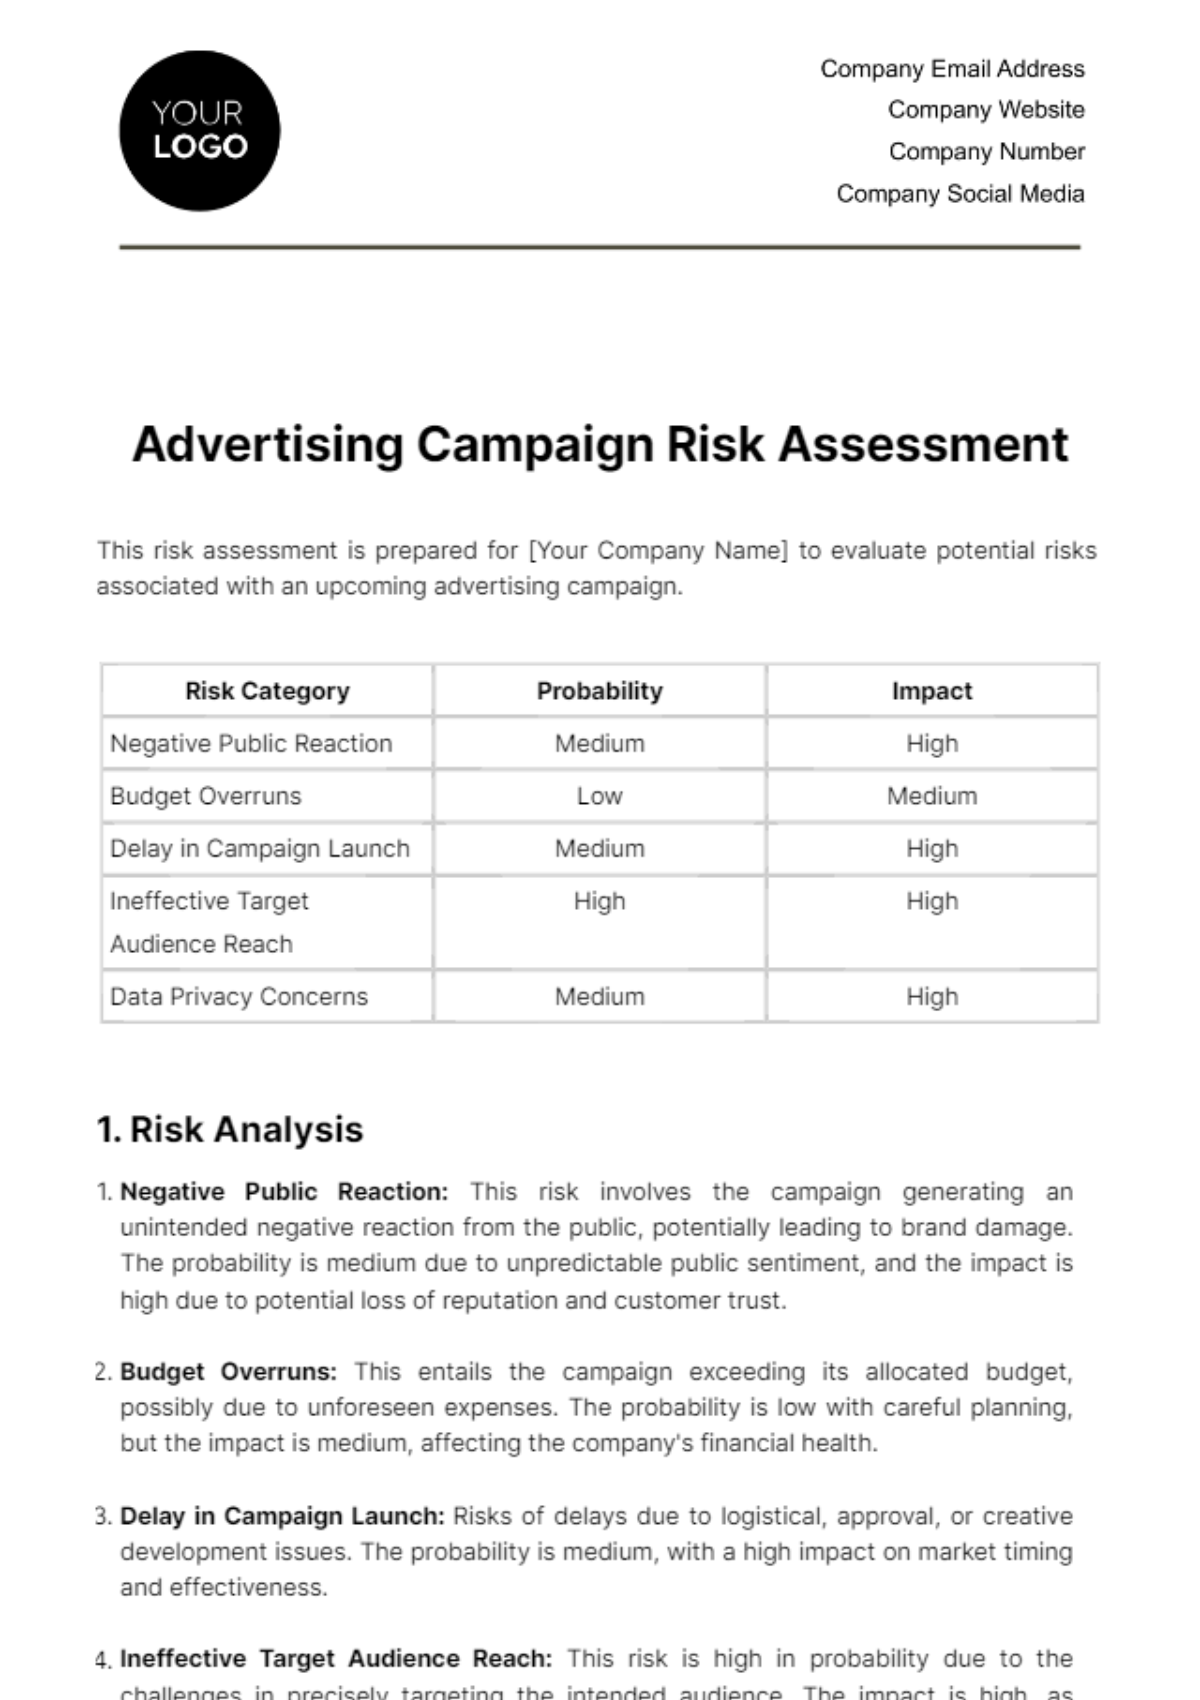 Advertising Campaign Risk Assessment Template